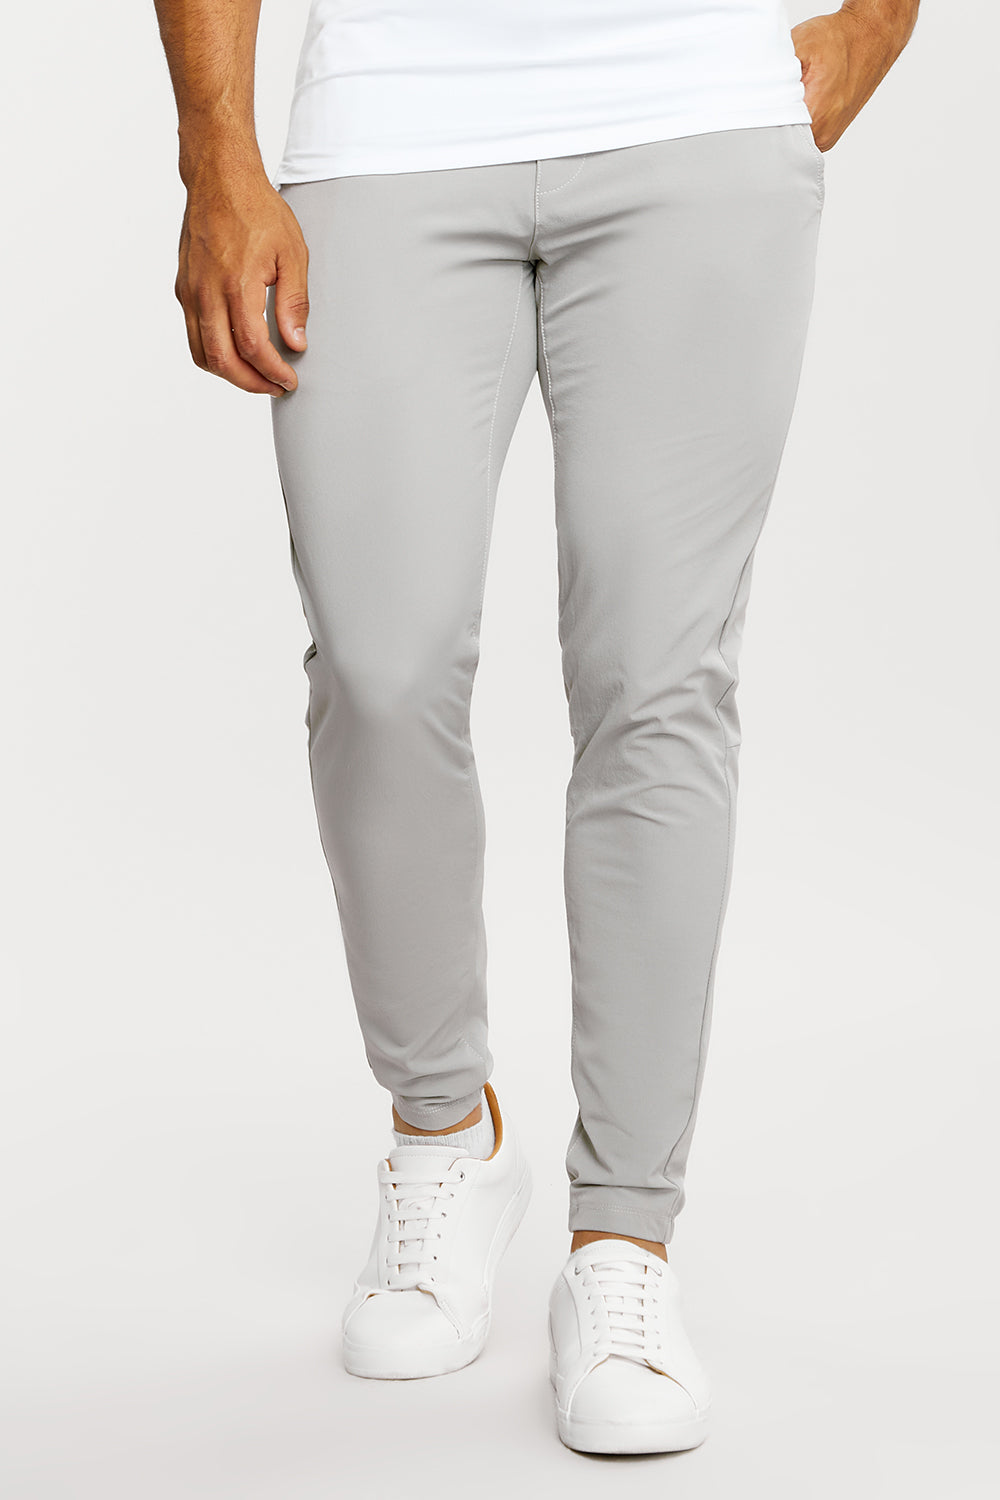 The Everyday Pants in Breen · Teym